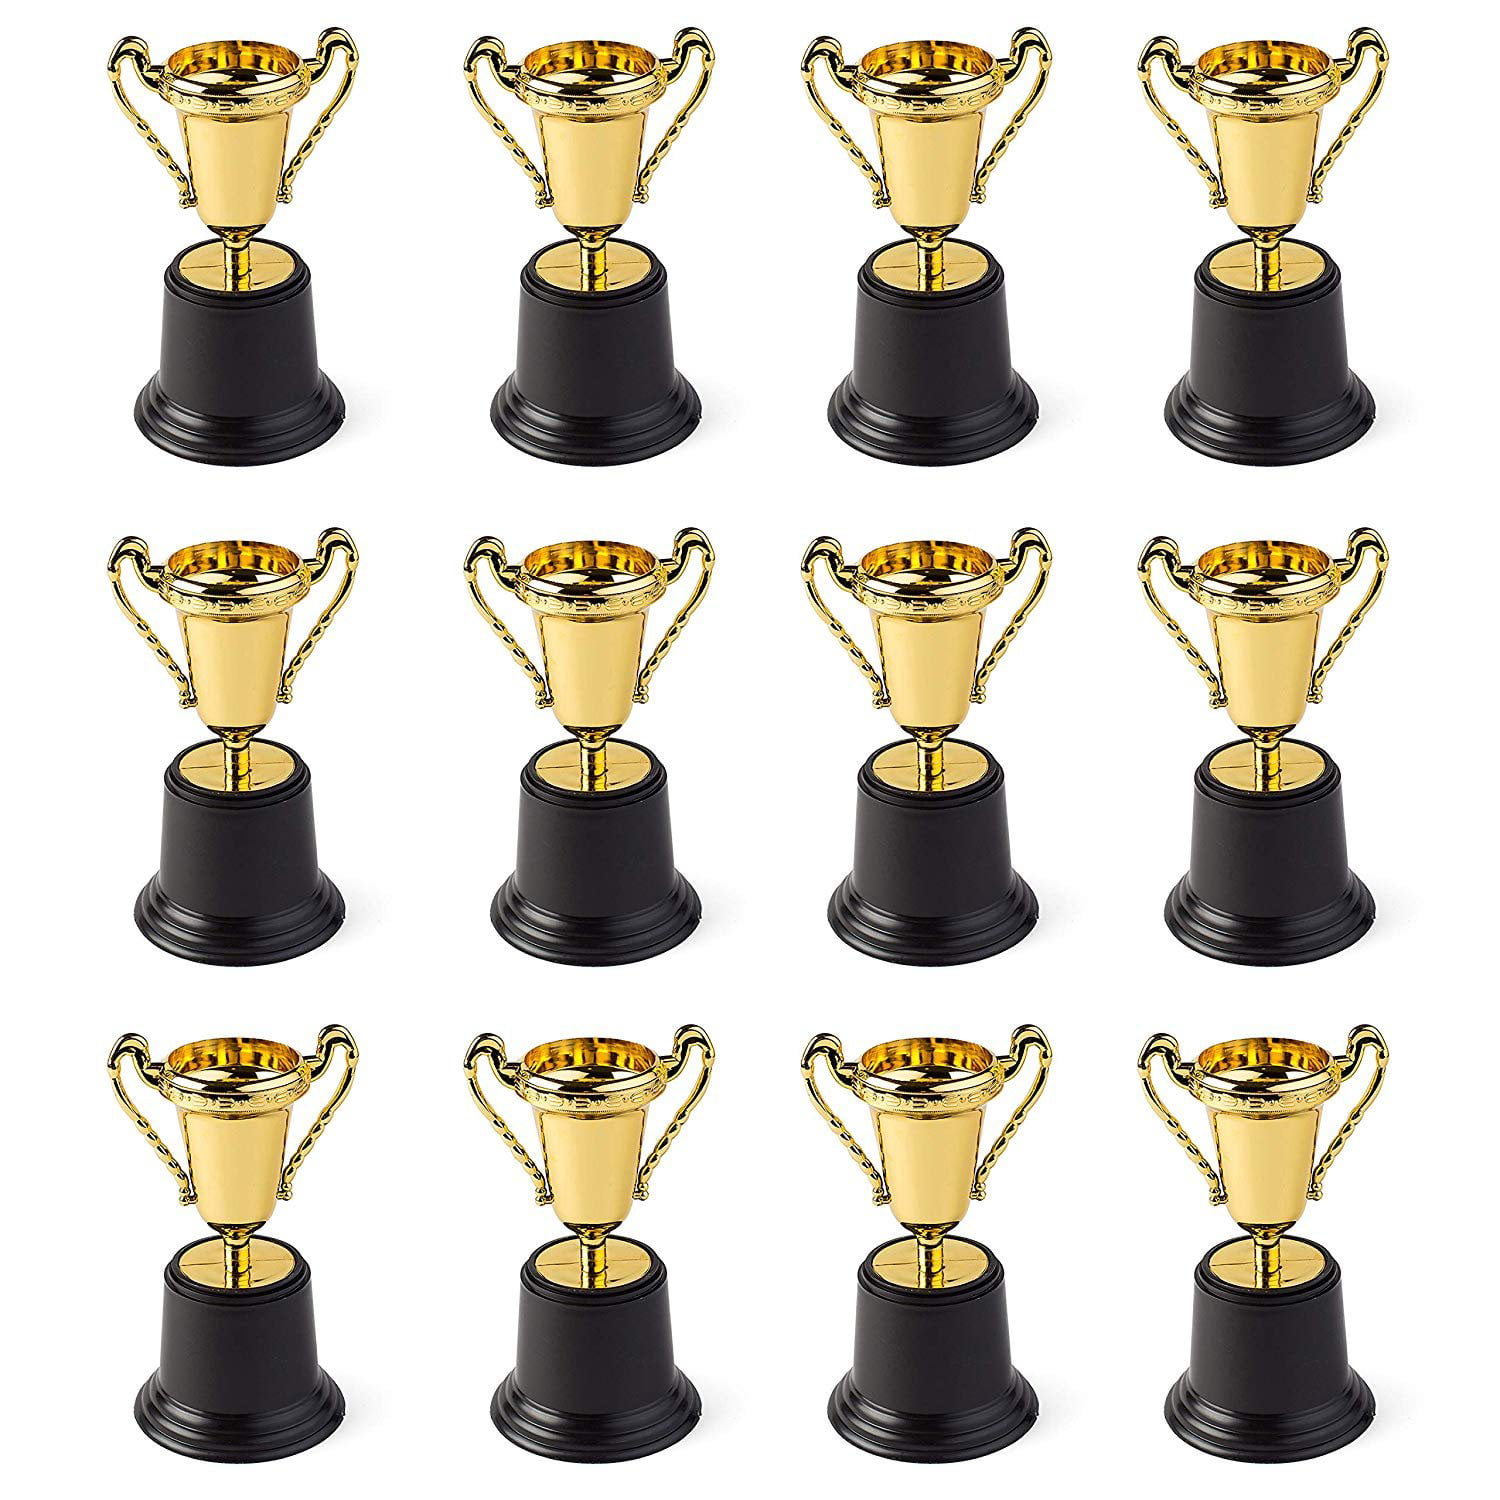 Perfect To Reward Those Who Have Achieved Gold Award Trophy Cups 5 First Place Winner Award Trophies by Neliblu Bulk Pack of 12 For Kids and Adults 